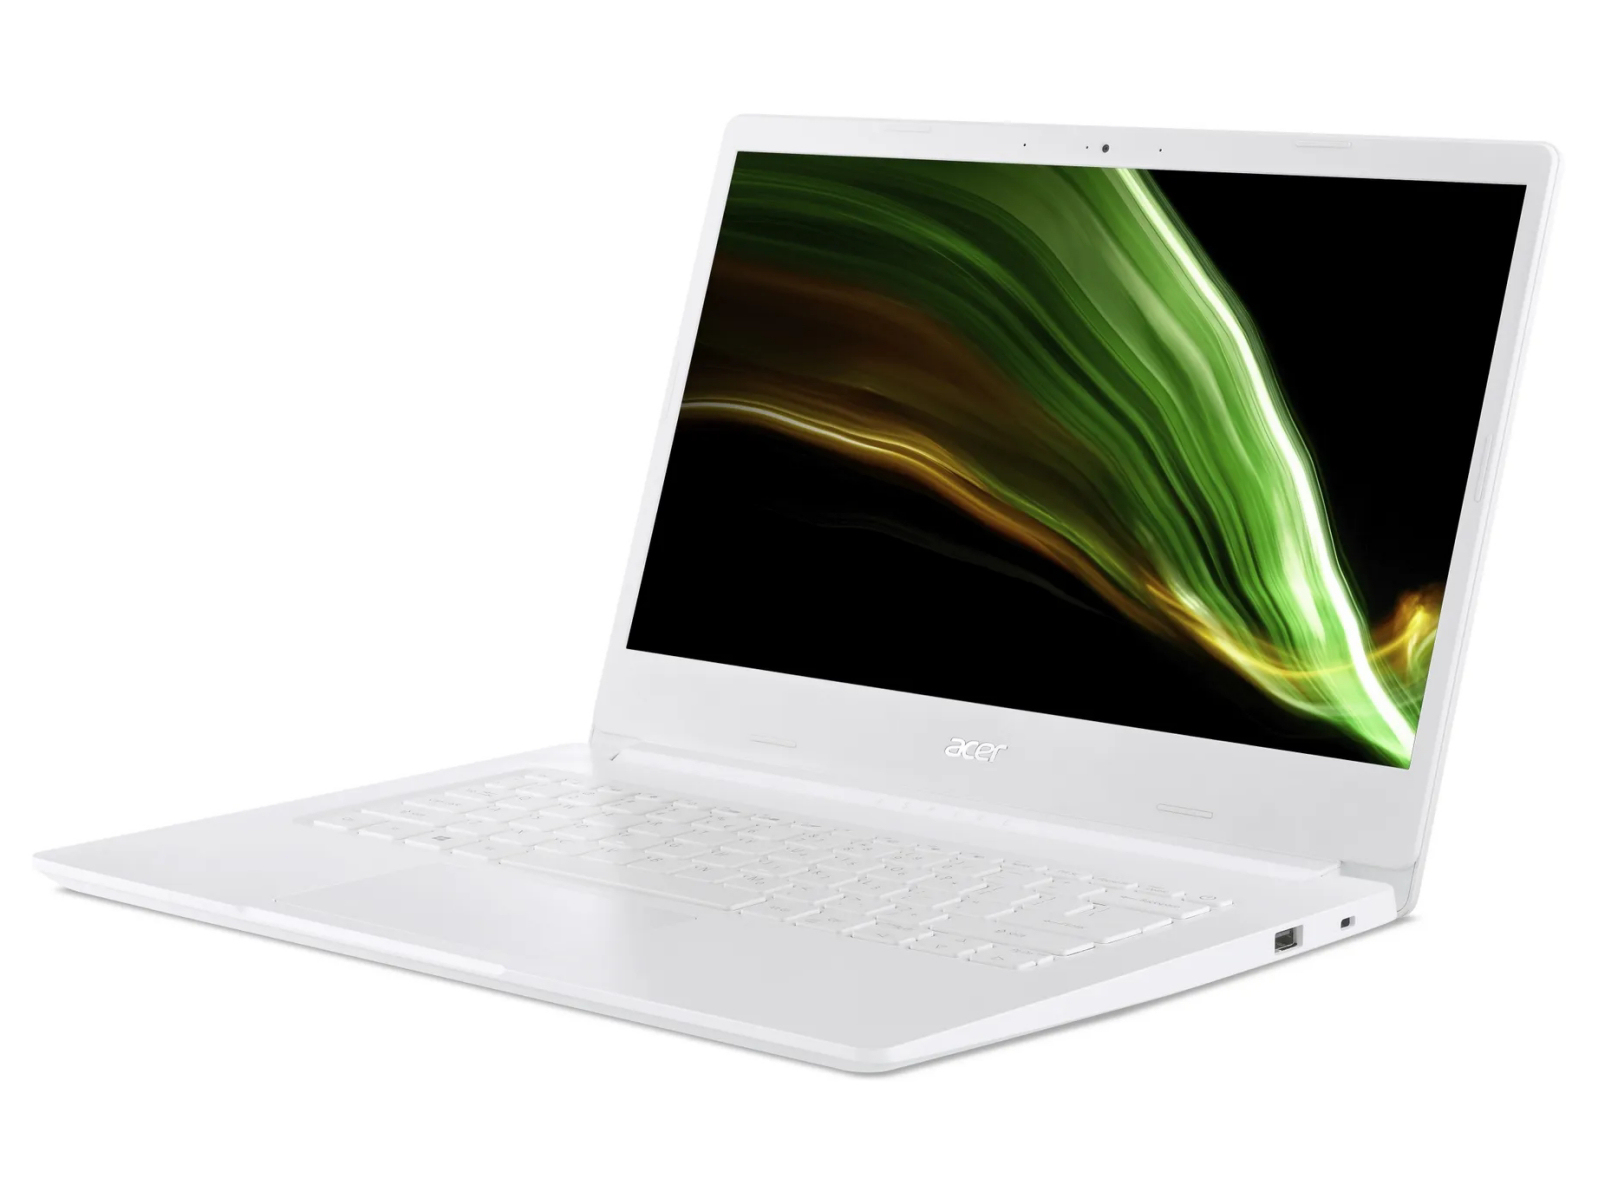 Acer Aspire 1 A114-61: Outstanding battery life thanks to a Snapdragon SoC thumbnail